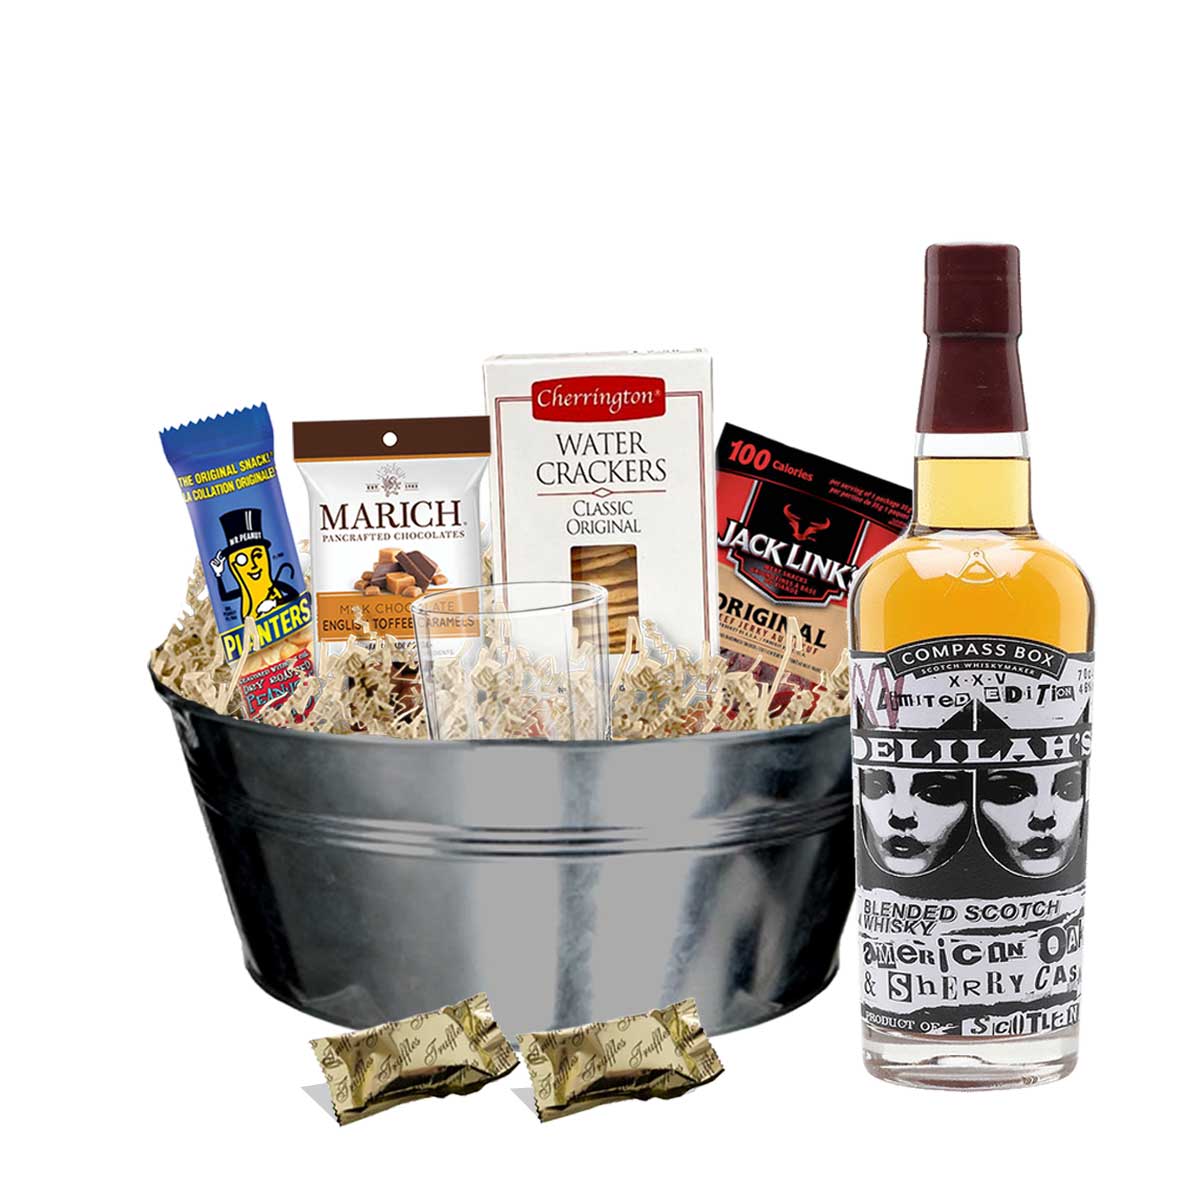 TAG Liquor Stores BC - Compass Box Delilah's XXV Blended Scotch Whisky 750ml Gift Basket